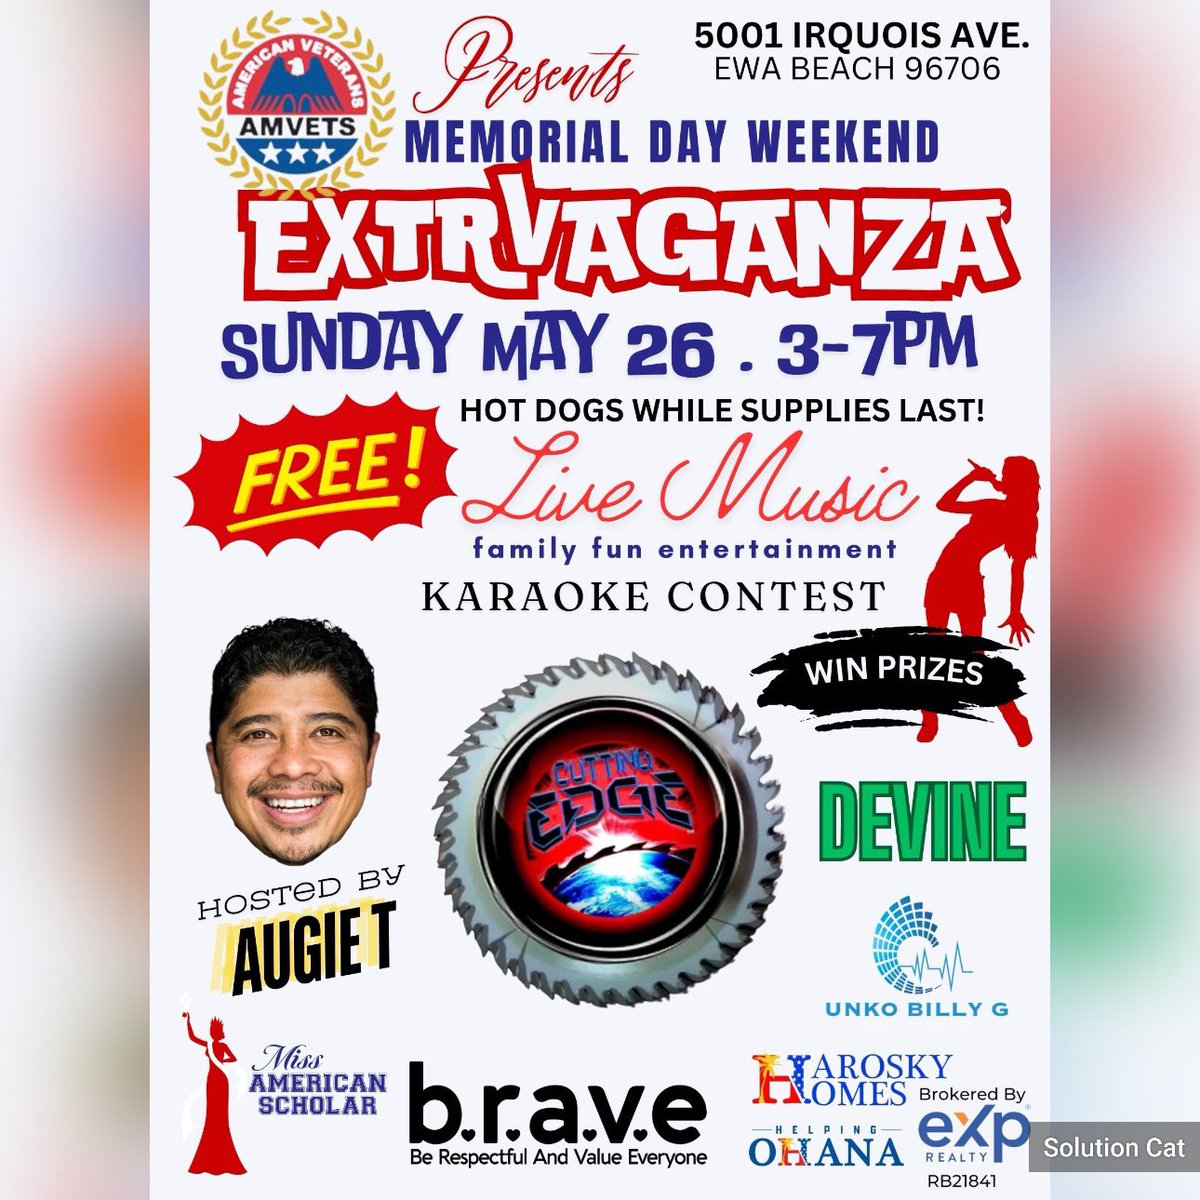 FREE EVENT at the @amvetshawaiicenter #MemorialDayWeekend Sunday 26th
#FreeHotDogs While supplies last, fun for the whole family, #karaokecontest LIVE music @cuttingedgebandhawaii #Divine , @official_b.r.a.v.e MAHALO to @dalazarus our amazing sponsor @haroskyhomes